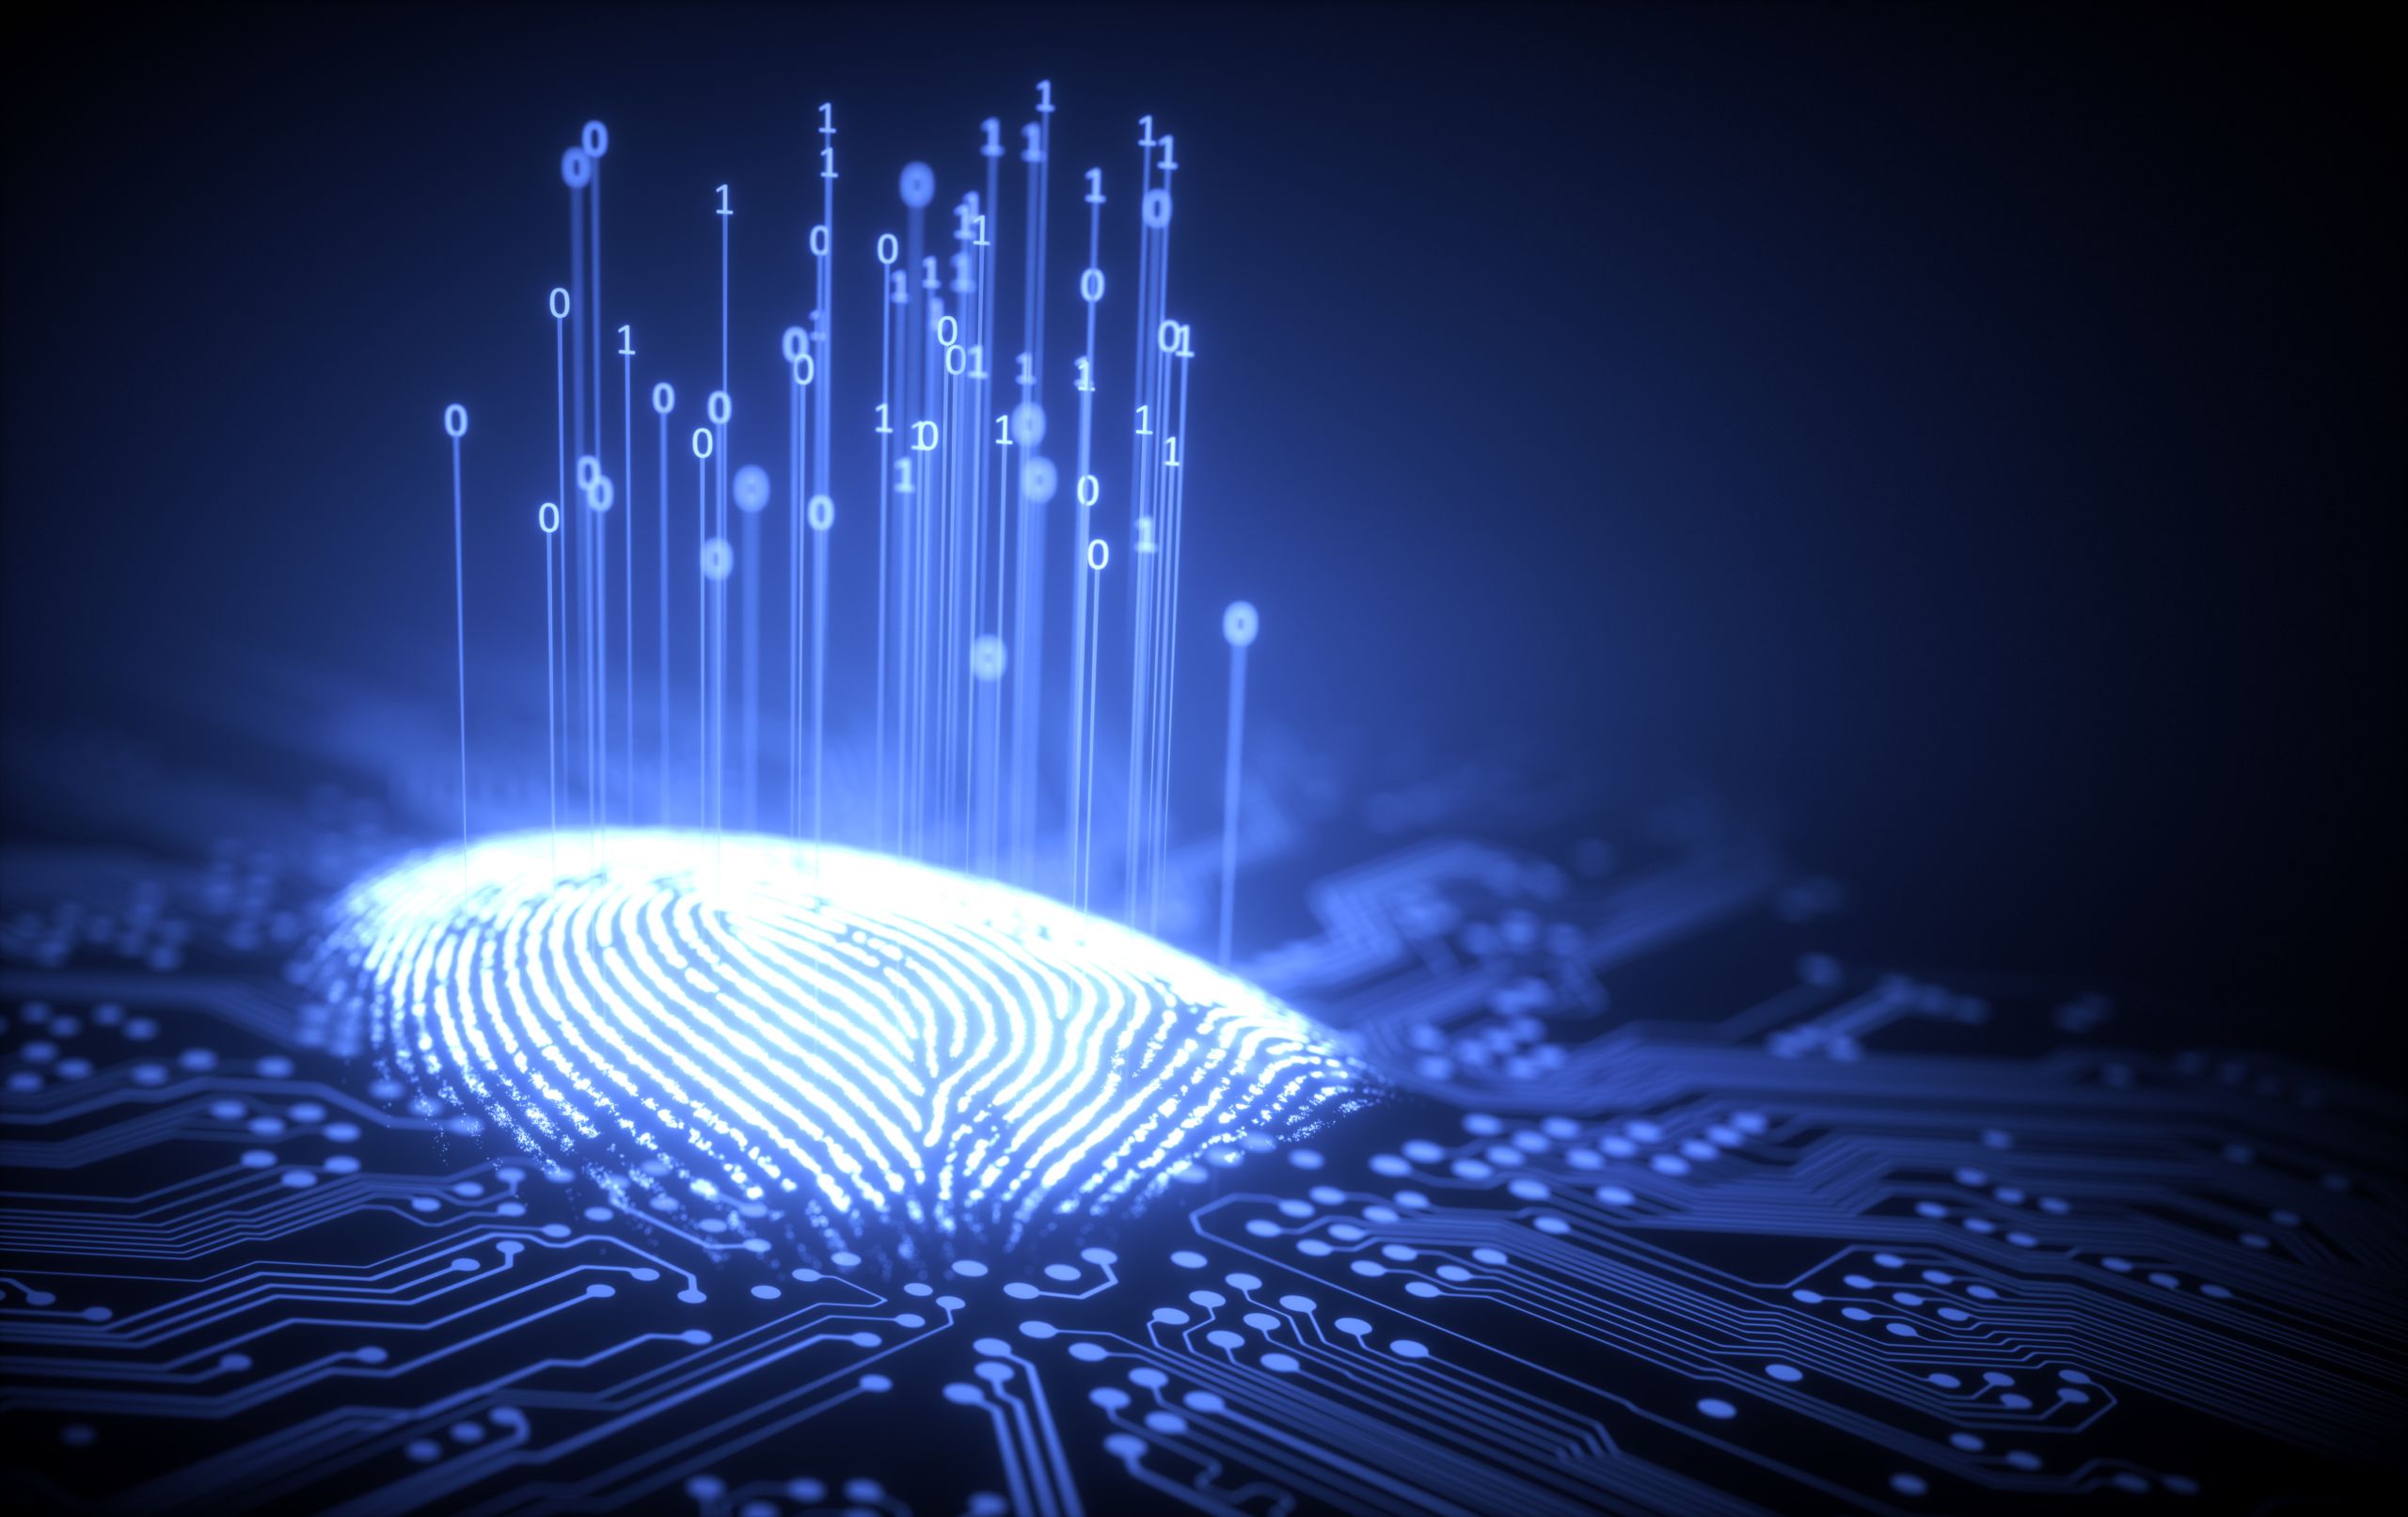 Fingerprint on computer chip illustrating cybersecurity